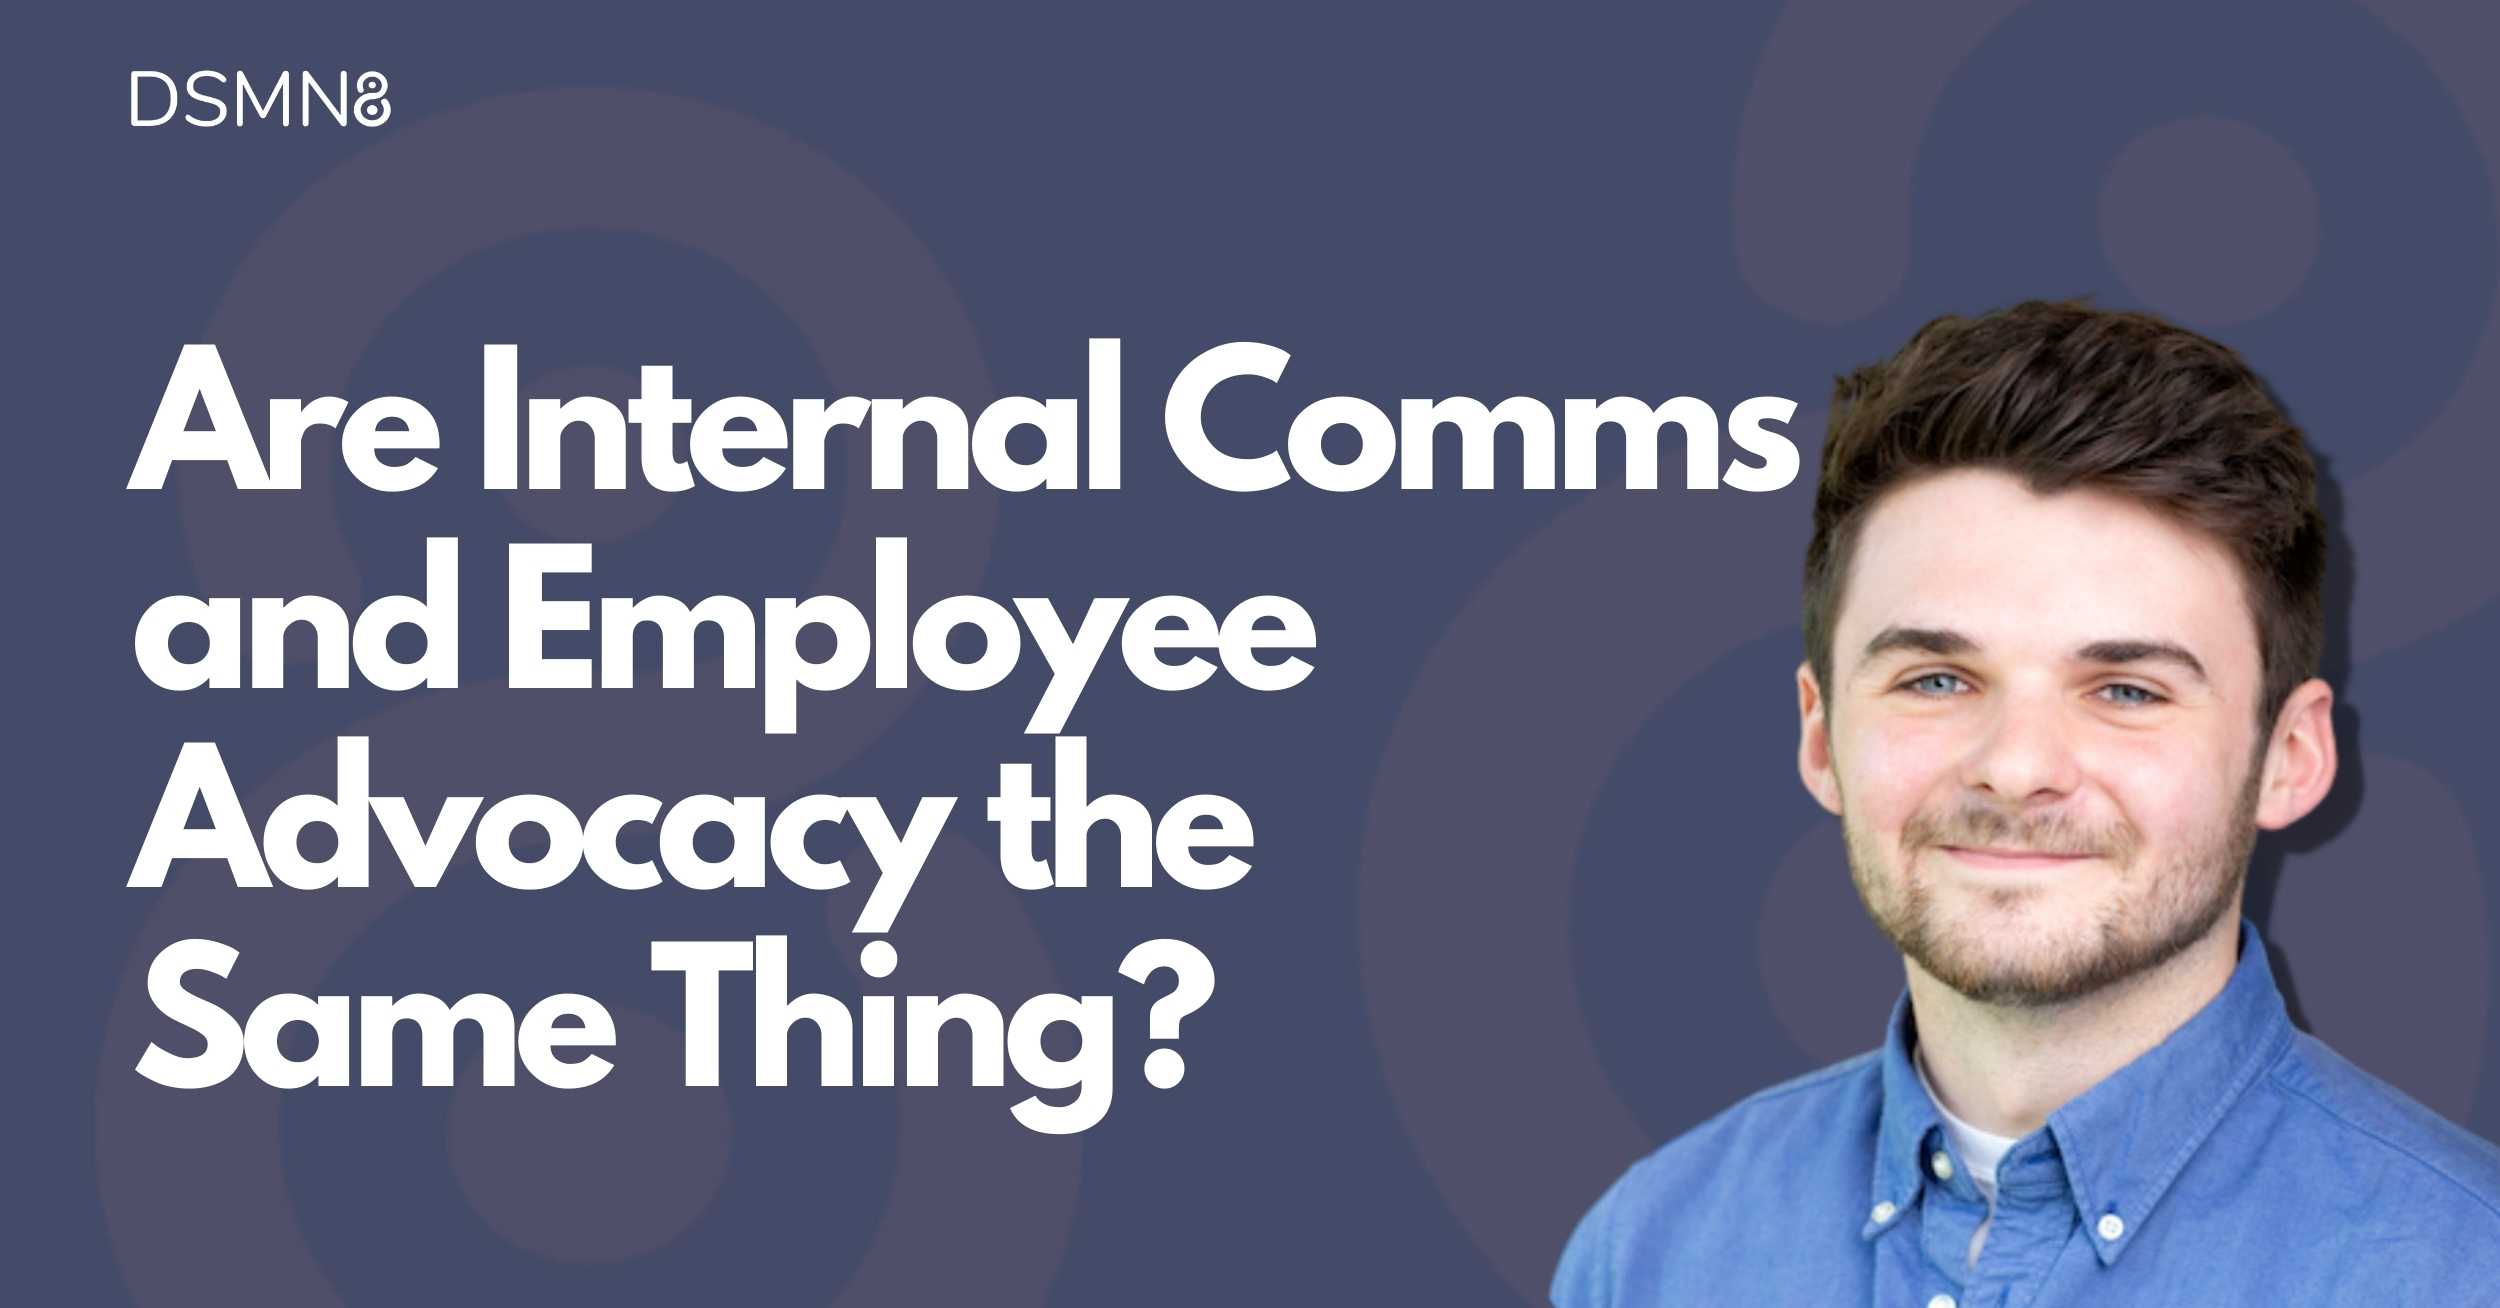 Are Internal Comms and Employee Advocacy the Same Thing? | DSMN8